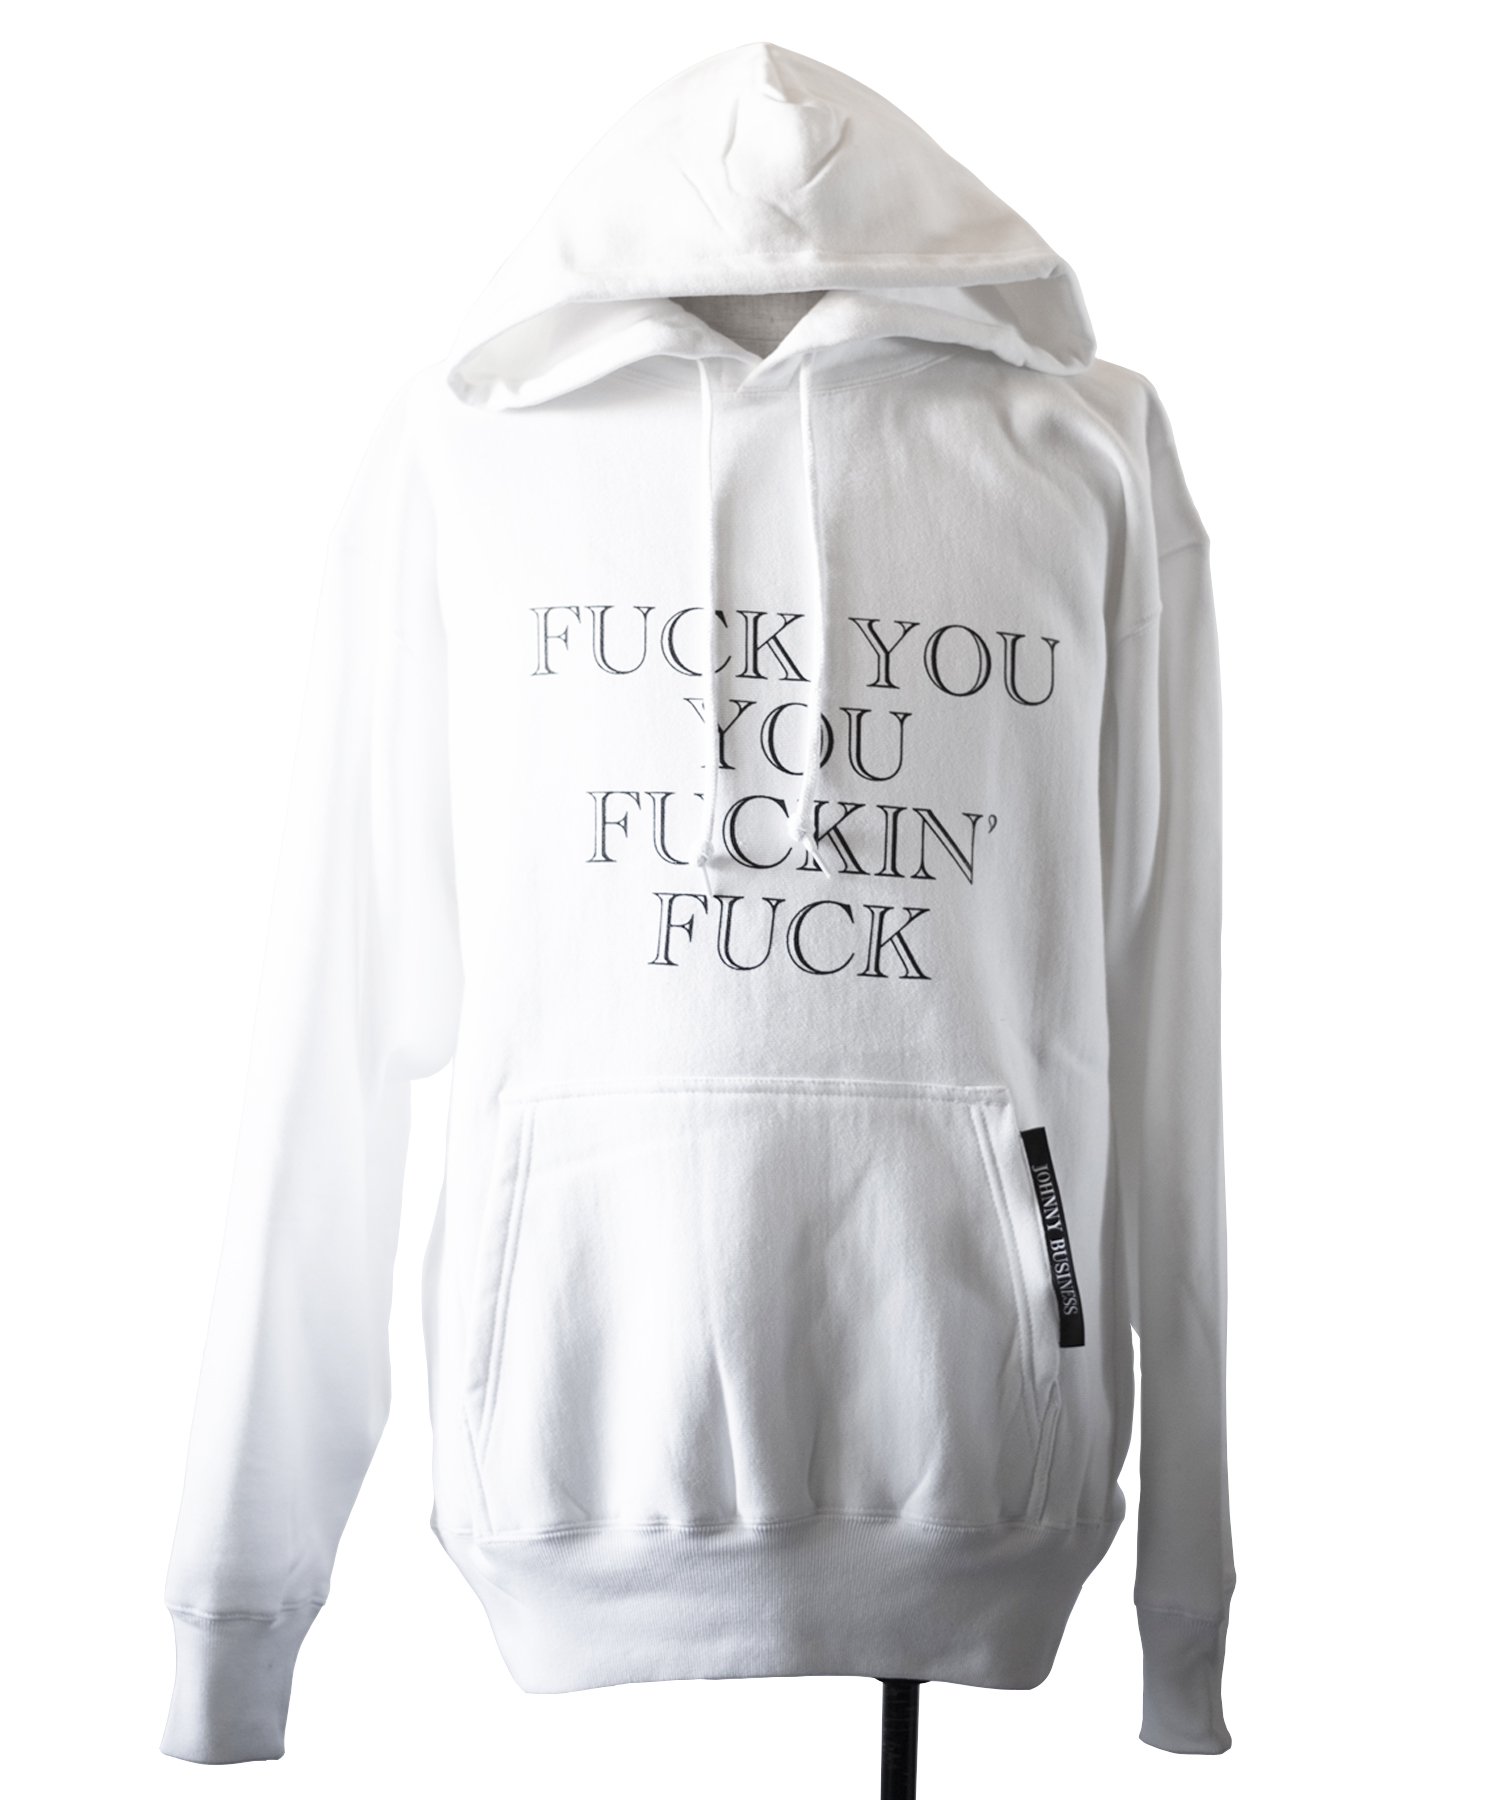 JOHNNY BUSINESS （ジョニービジネス） FUCK YOU YOU FUCKIN' FUCK Hoodie 【WHITE】